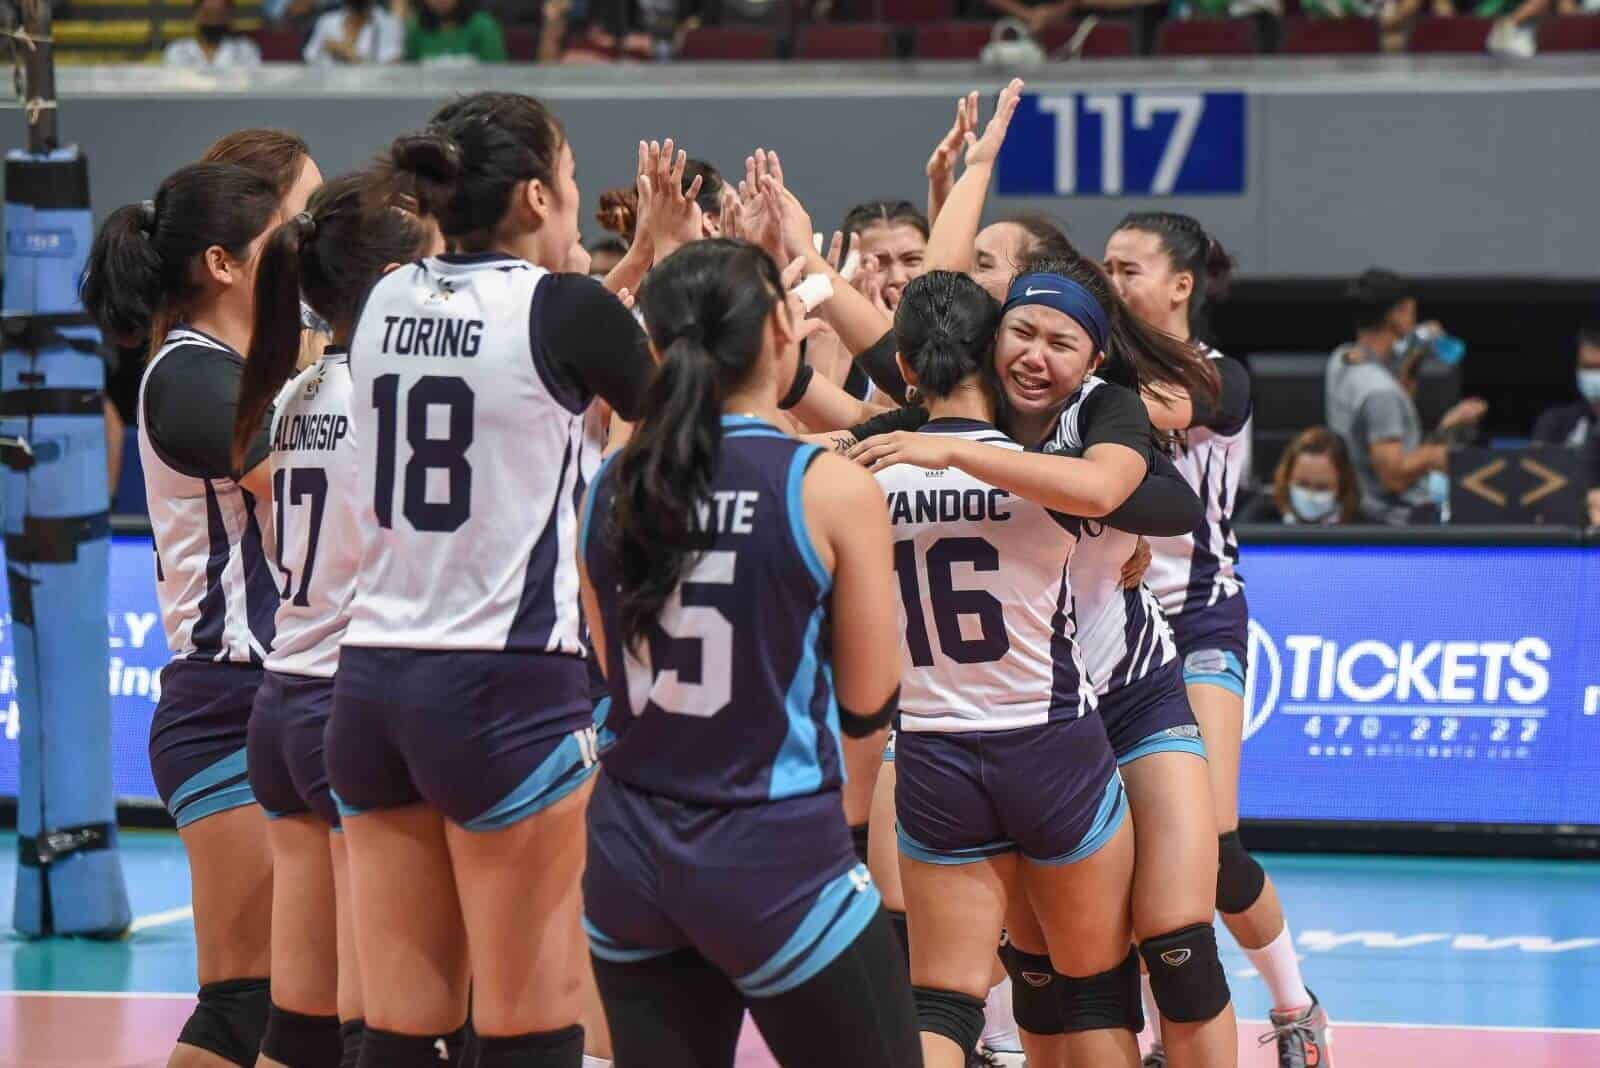 A group of female volleyball players celebrates their gritty win over La Salle, keeping Adamson's Final Four hopes alive.